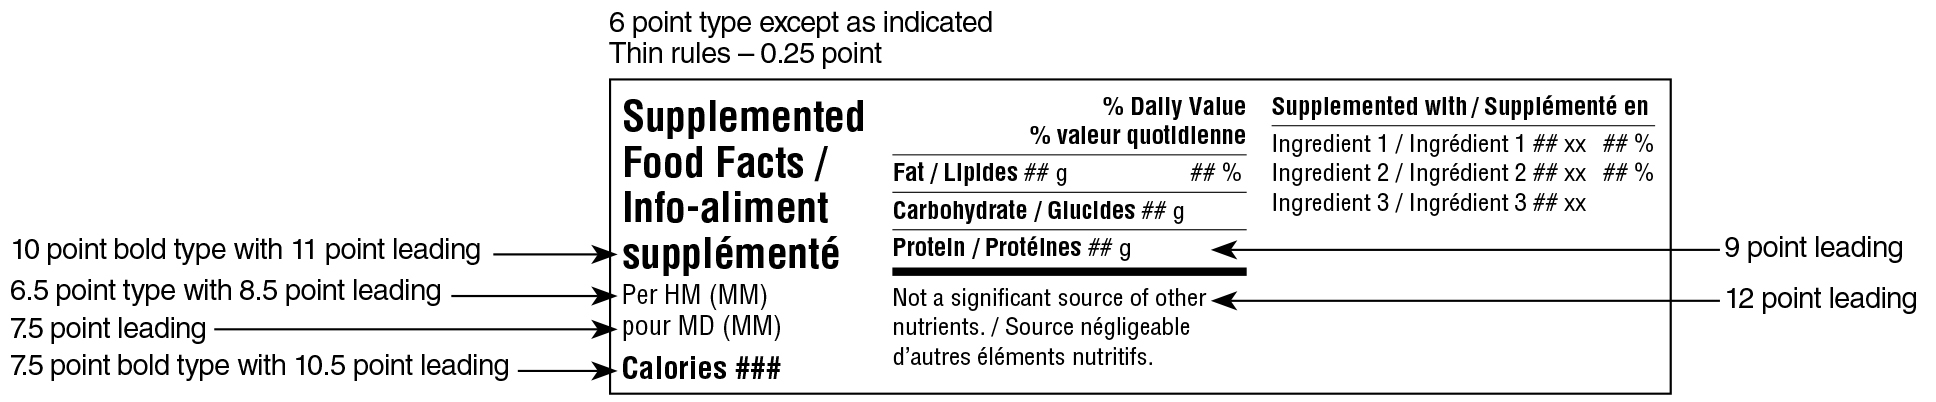 A bilingual Supplemented Food Facts table in simplified horizontal format surrounded by specifications. Text version below.